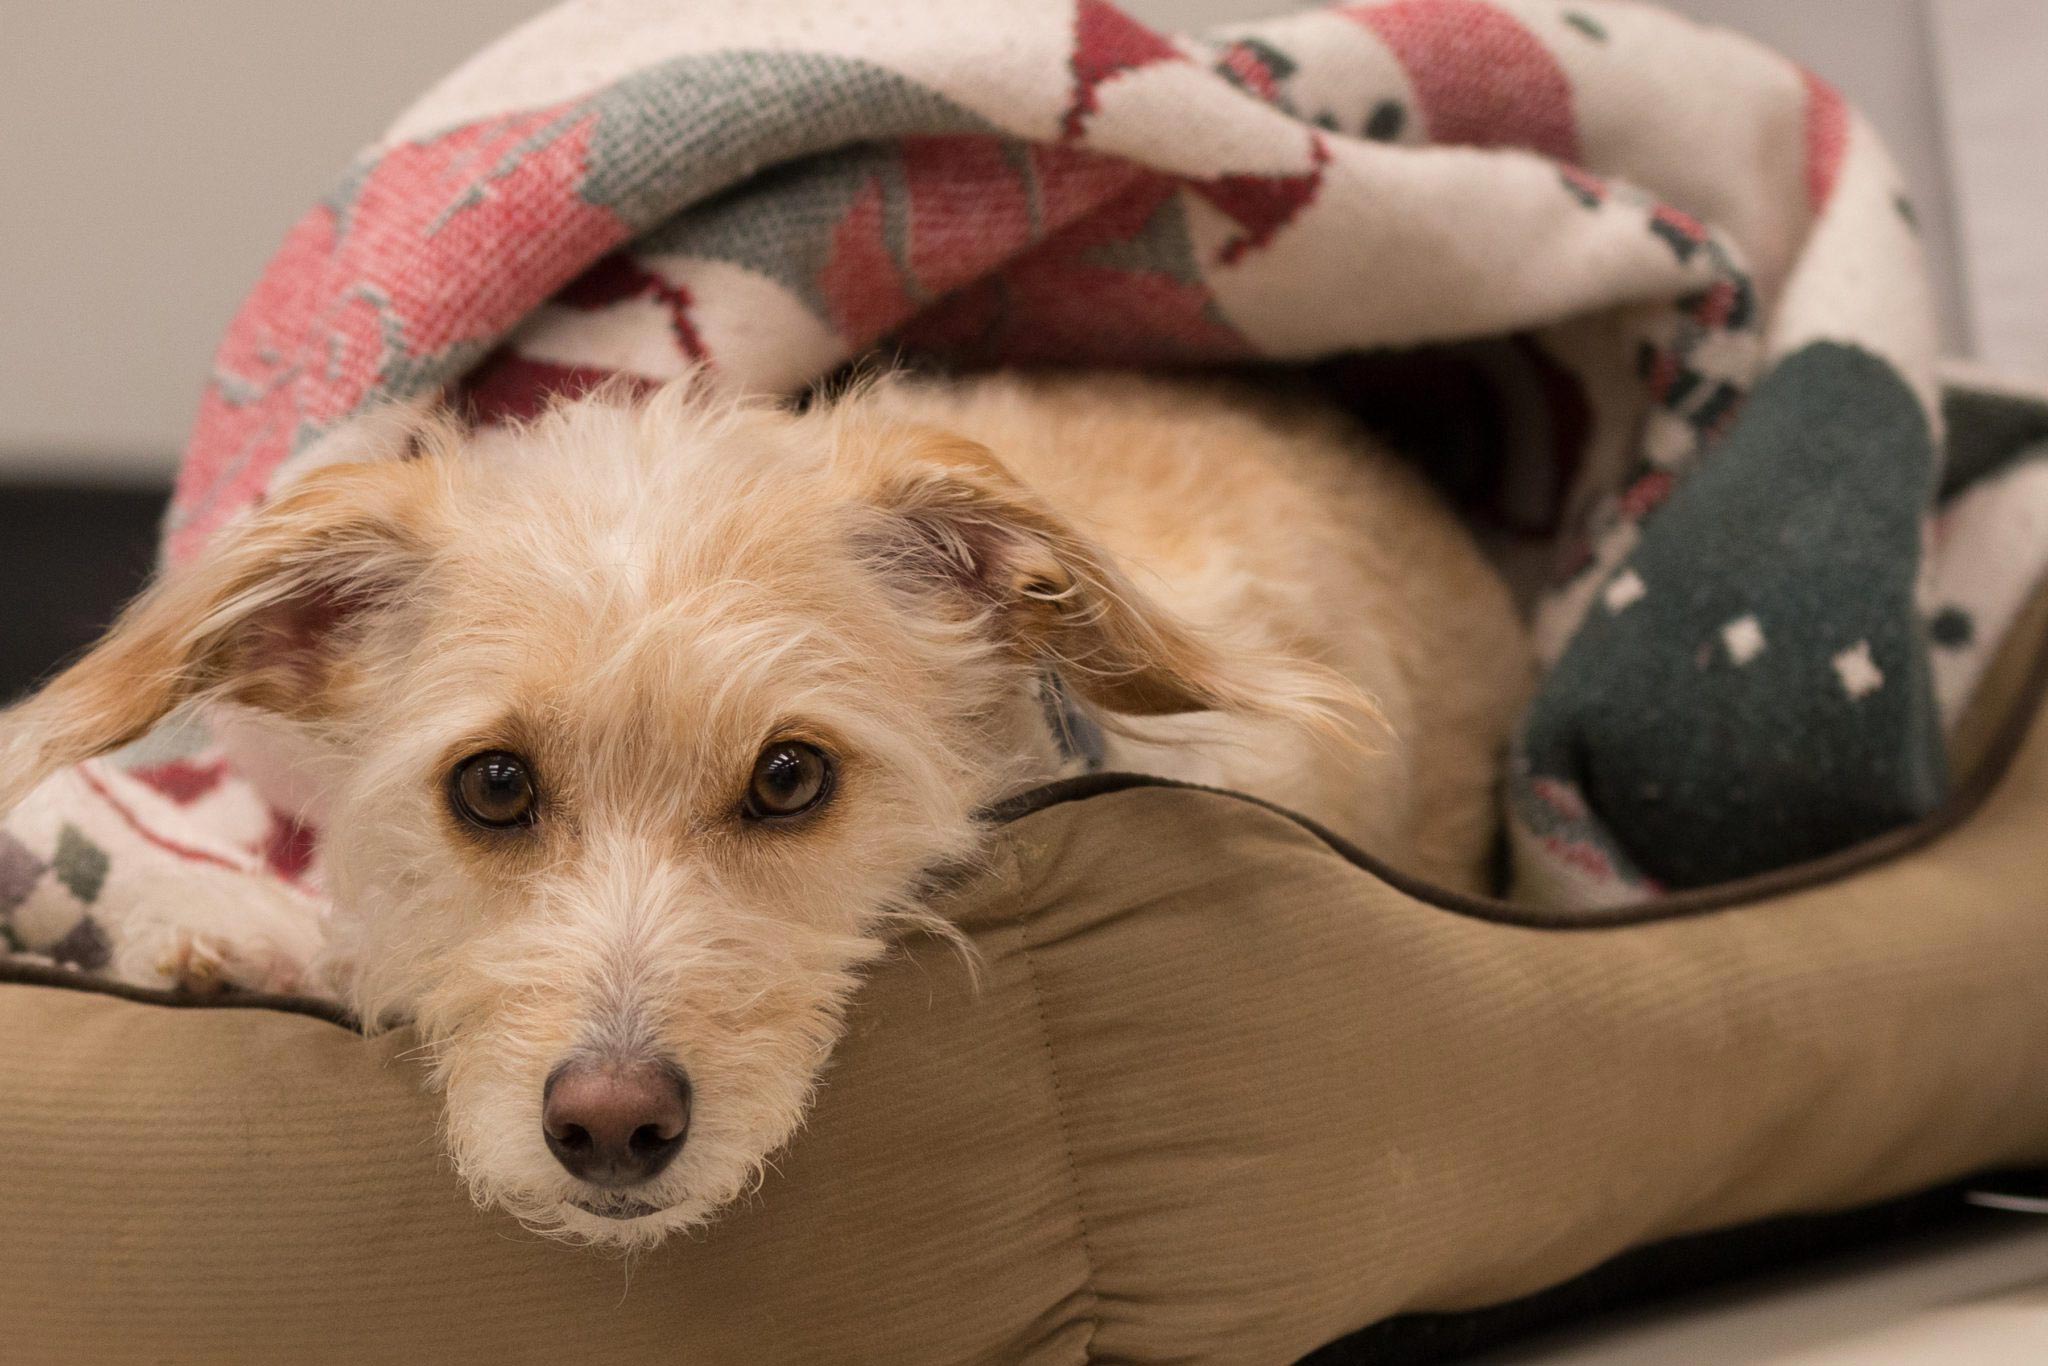 How to Tell if Your Dog Has a Fever - The Village Vets 24-Hour Emergency